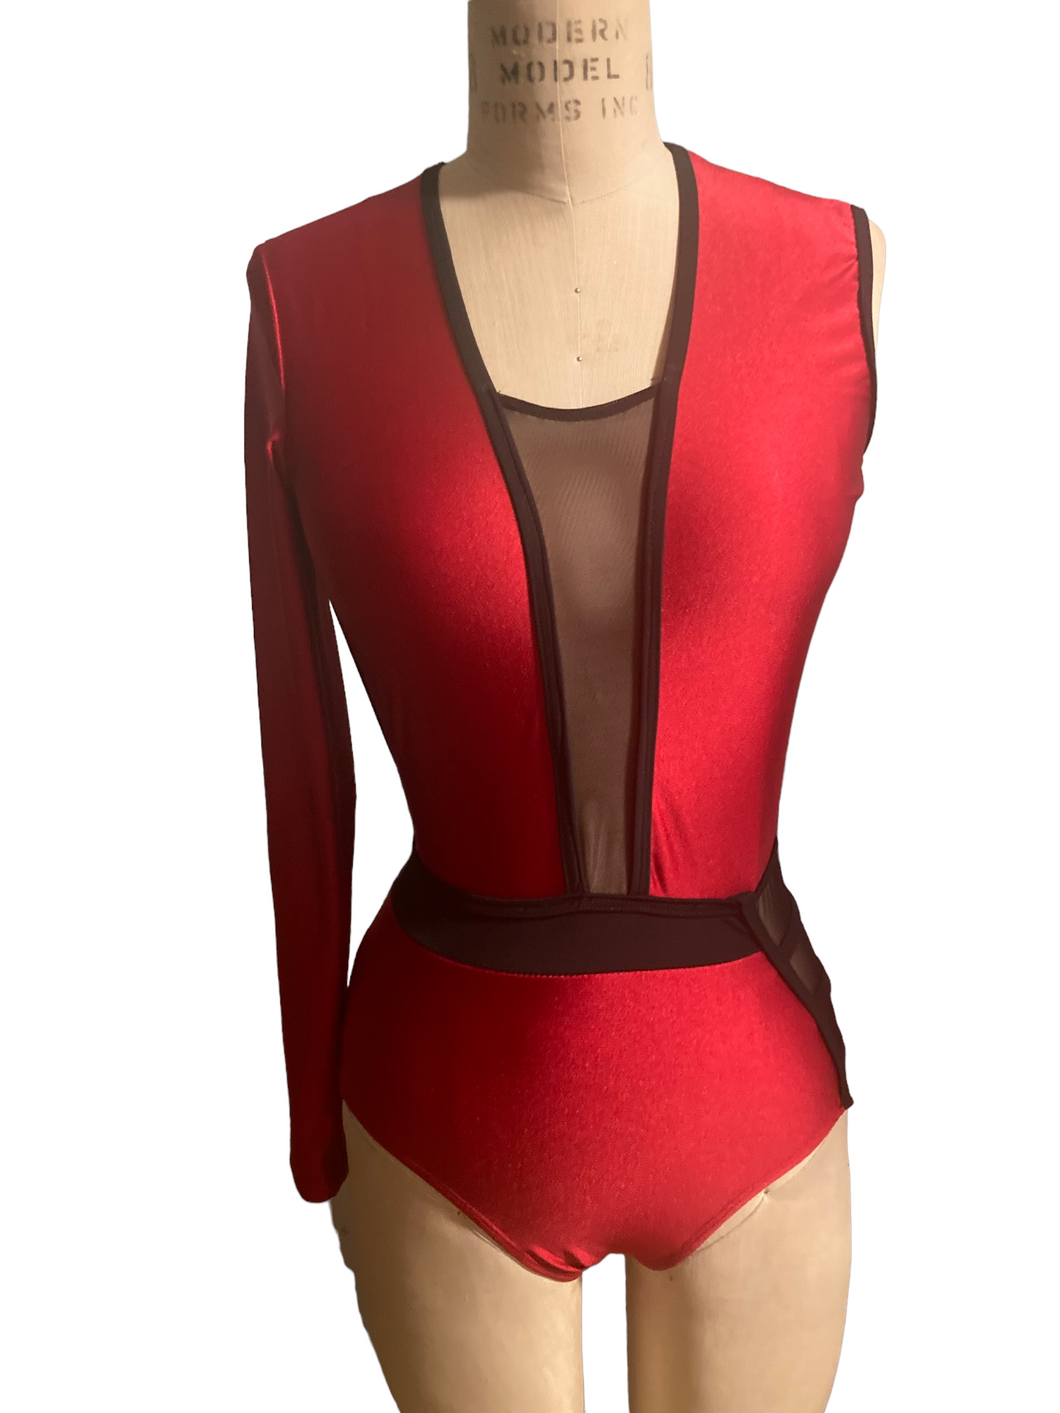 Custom made costume for Ellie, competitive costume, reserved listing for a red and black leo